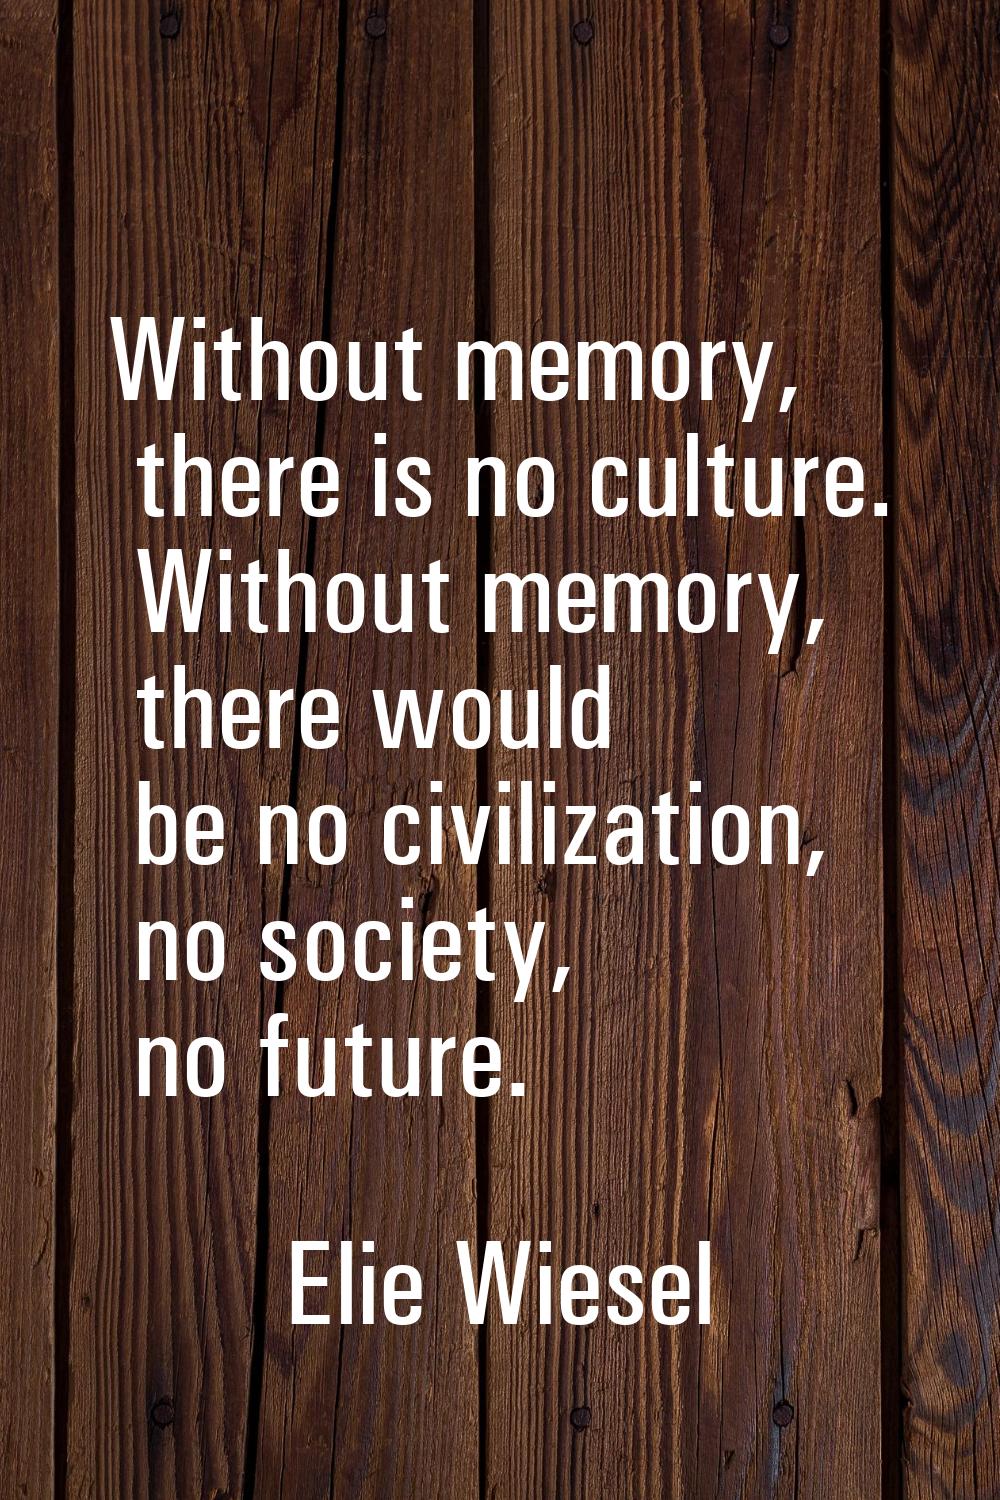 Without memory, there is no culture. Without memory, there would be no civilization, no society, no